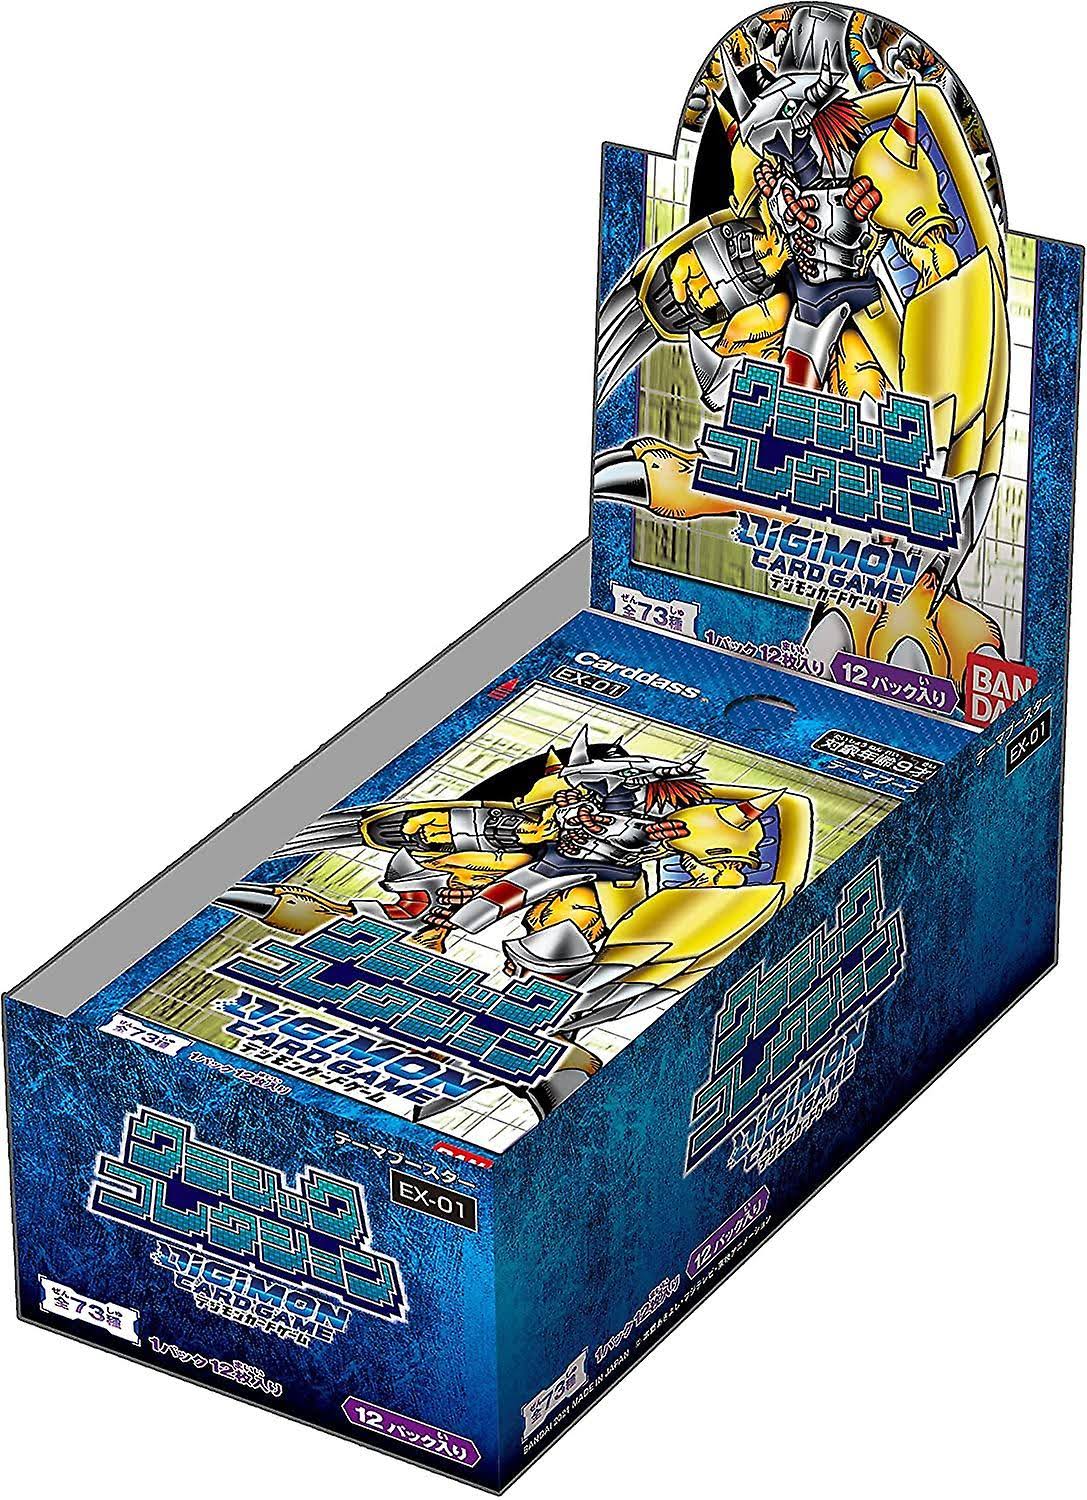 DIGIMON CARD GAME CLASSIC COLLECTION EX-01 (PACK OF 24)